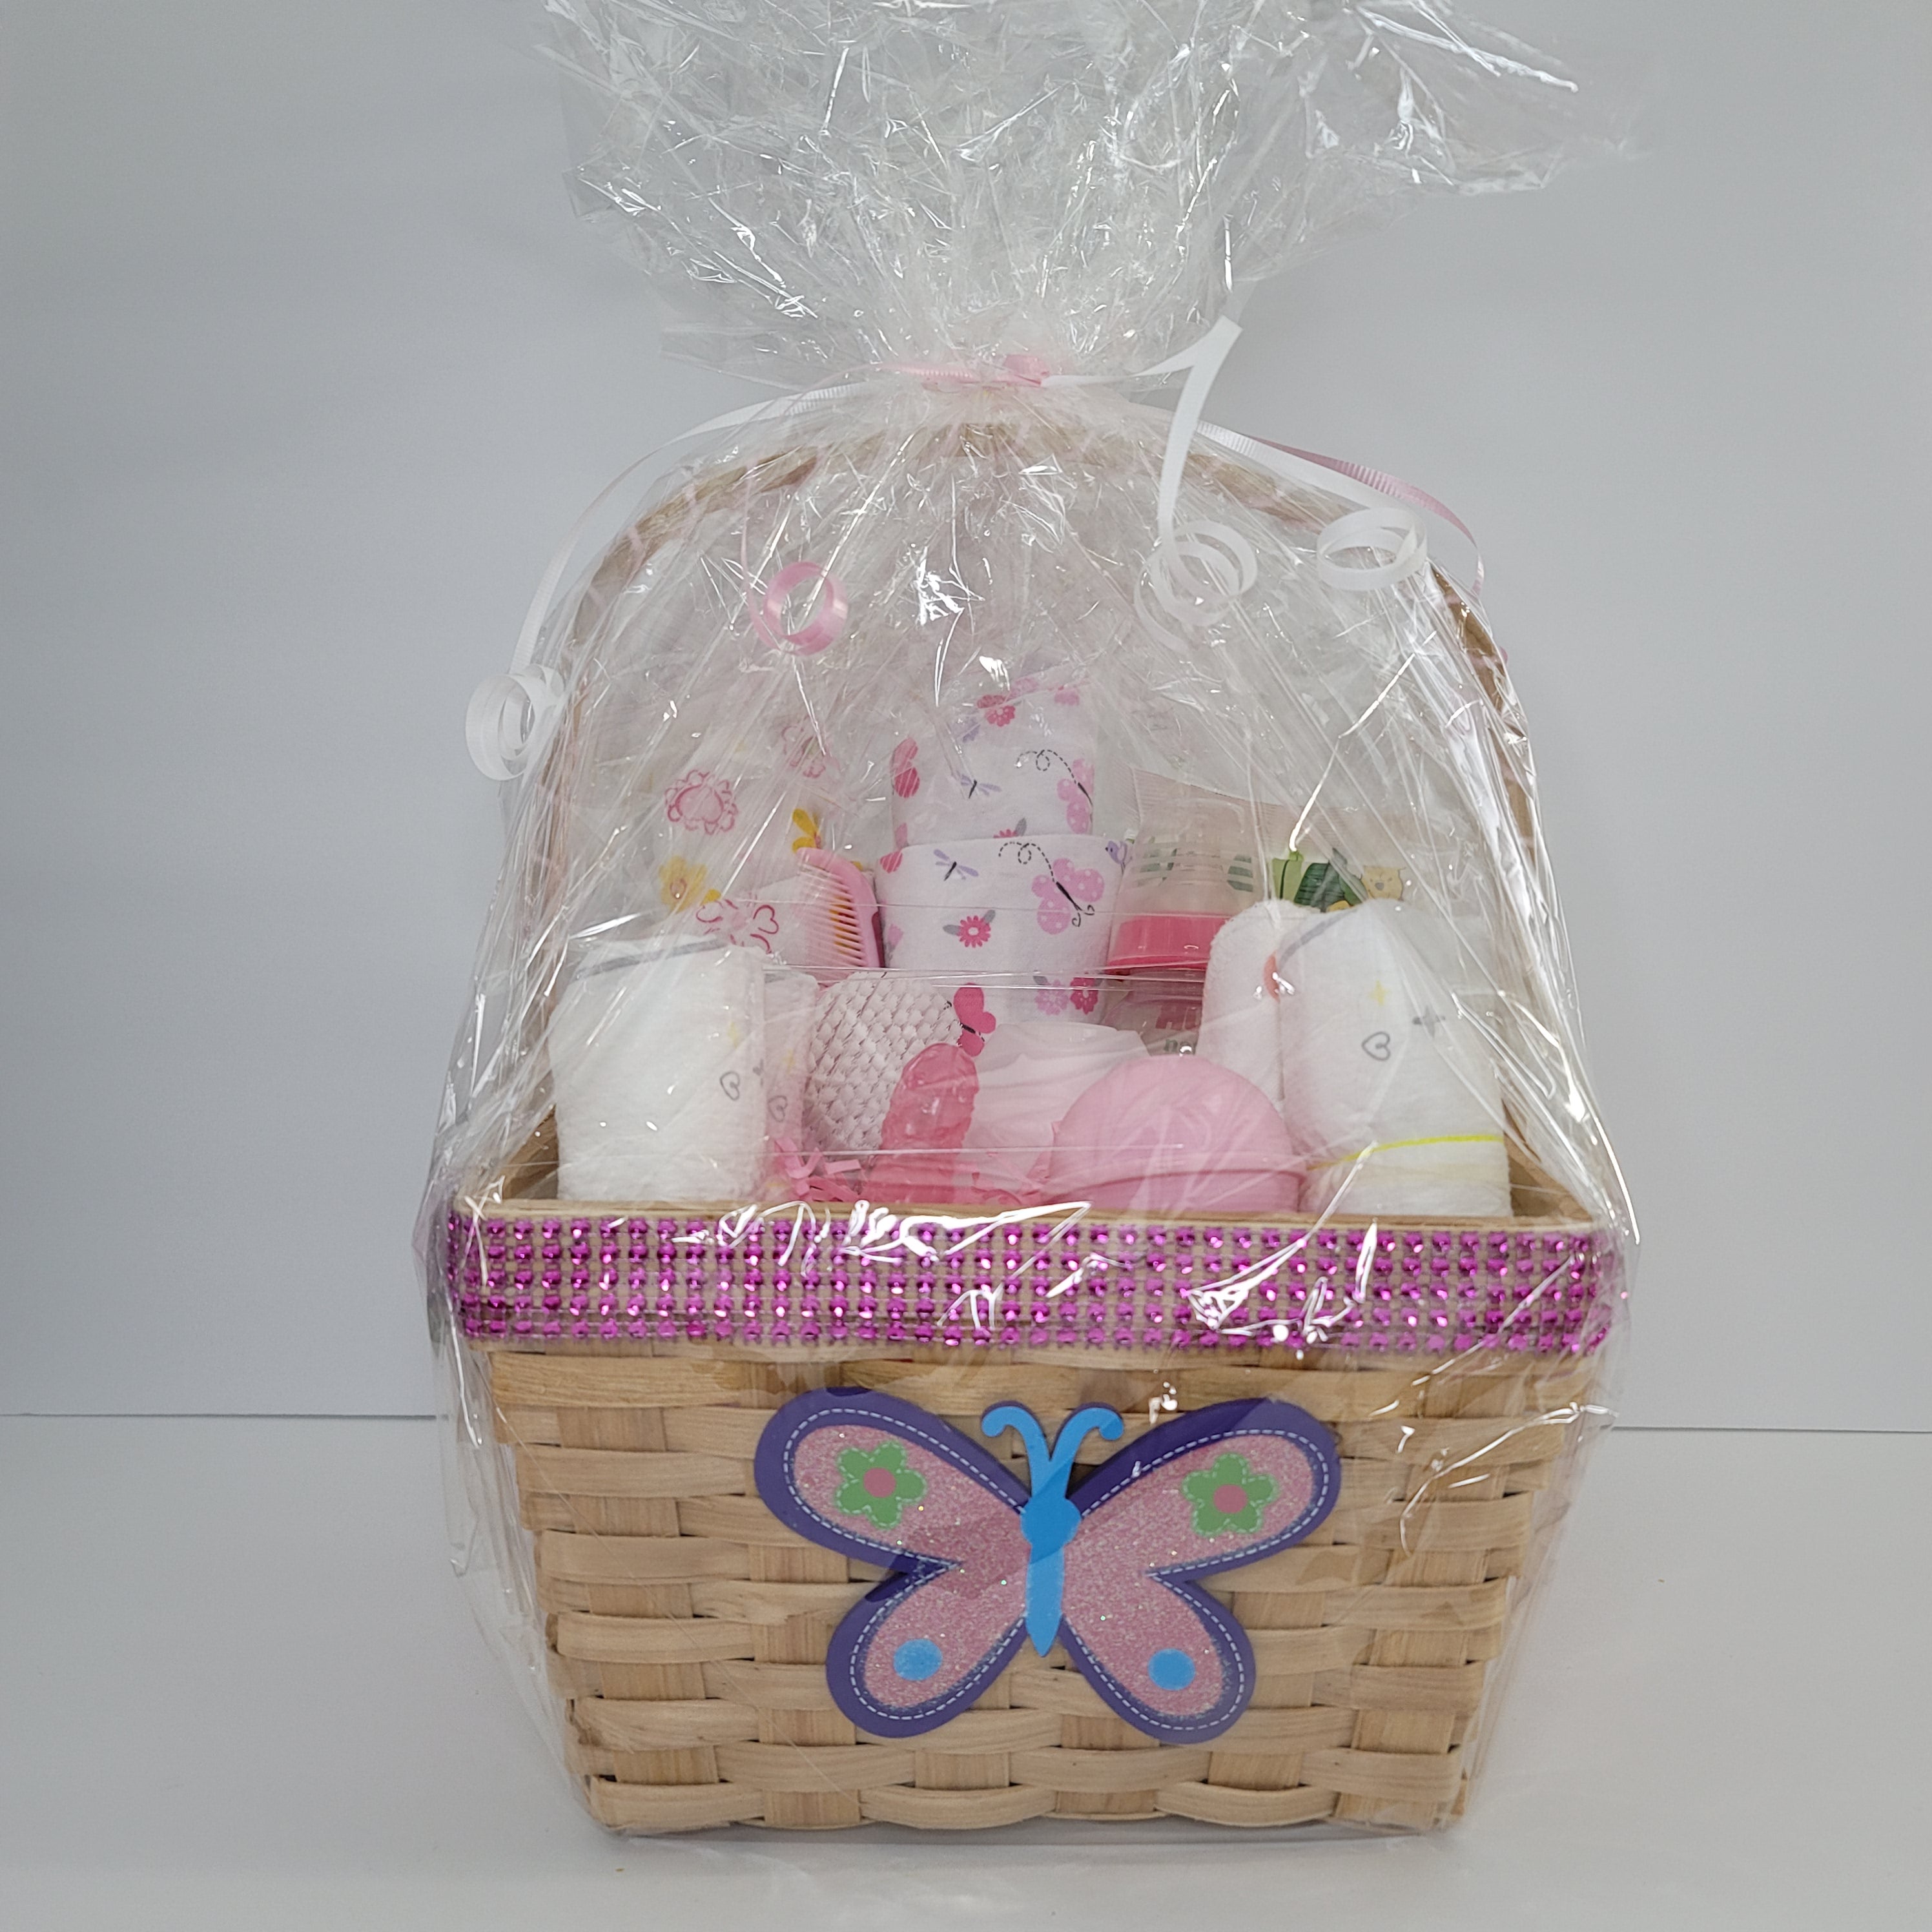 Gift basket for a baby shower I co-hosted! Can't wait to meet the twin... |  TikTok